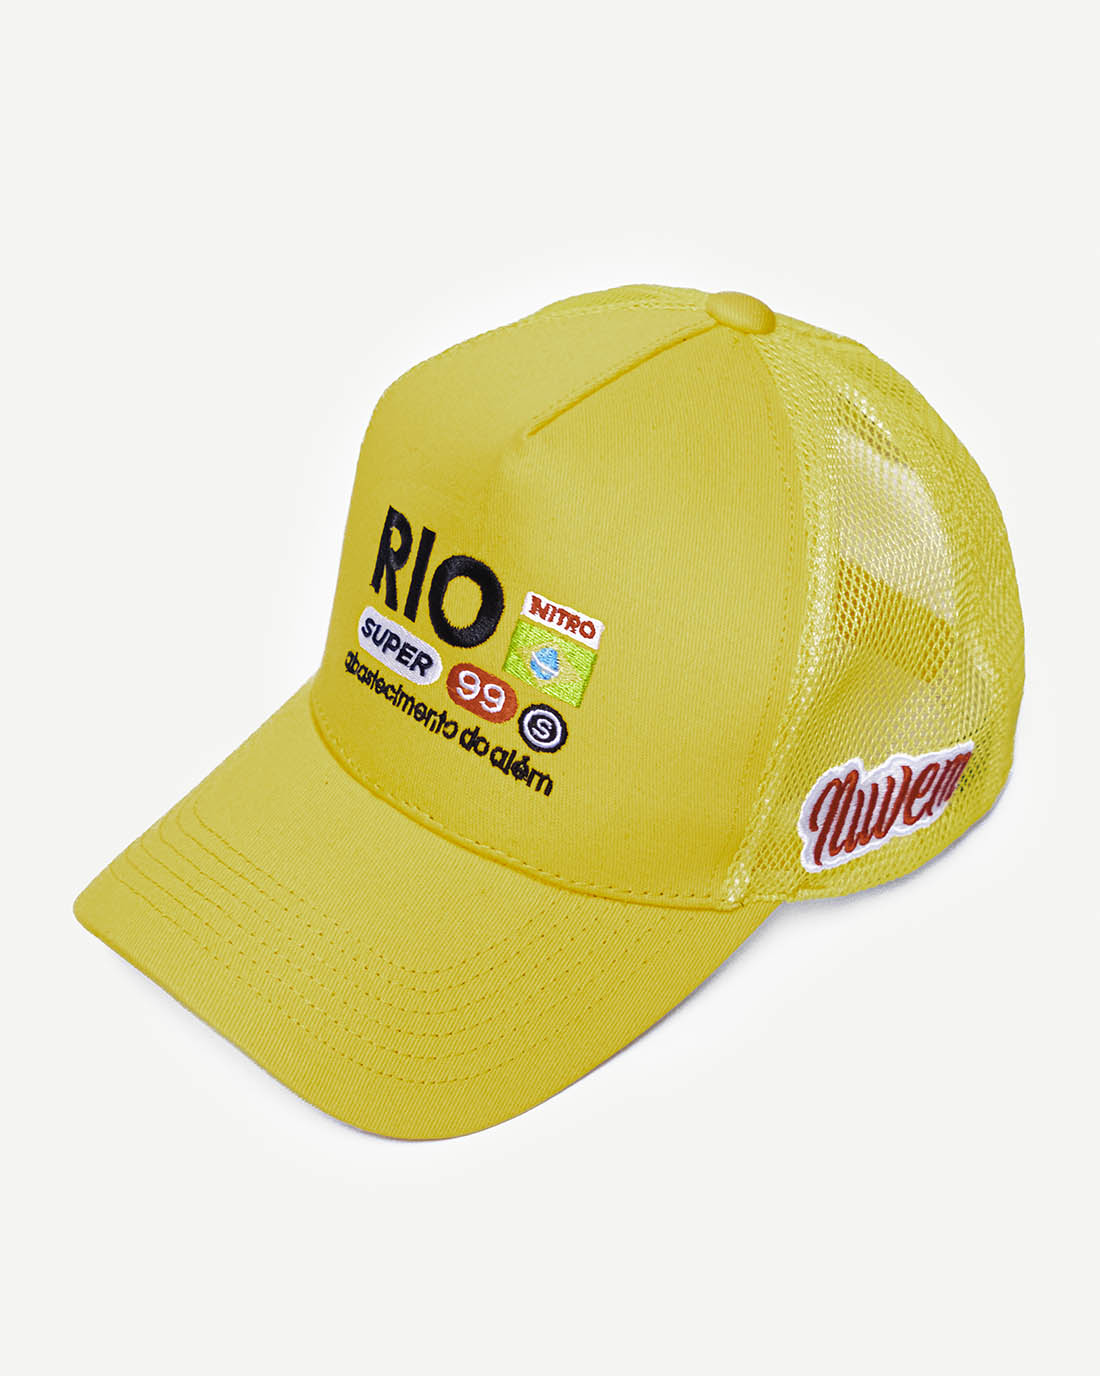 Front view of a yellow snapback hat with Brazilian-inspired embroidered design and cooling mesh back.